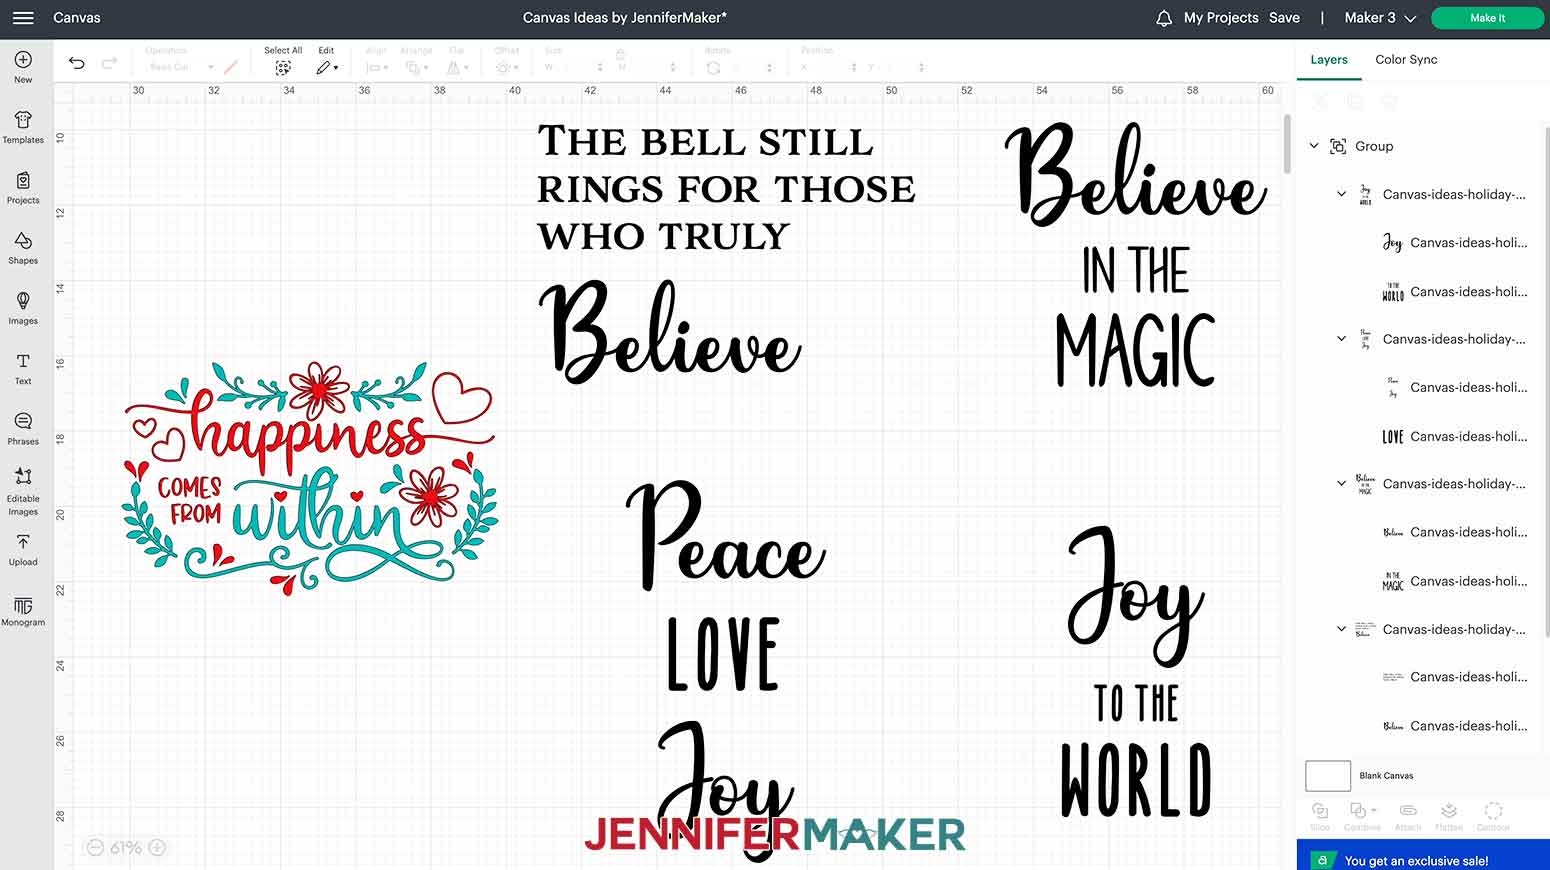 Dollar Tree Canvas Ideas SVGs uploaded on Design Space canvas.